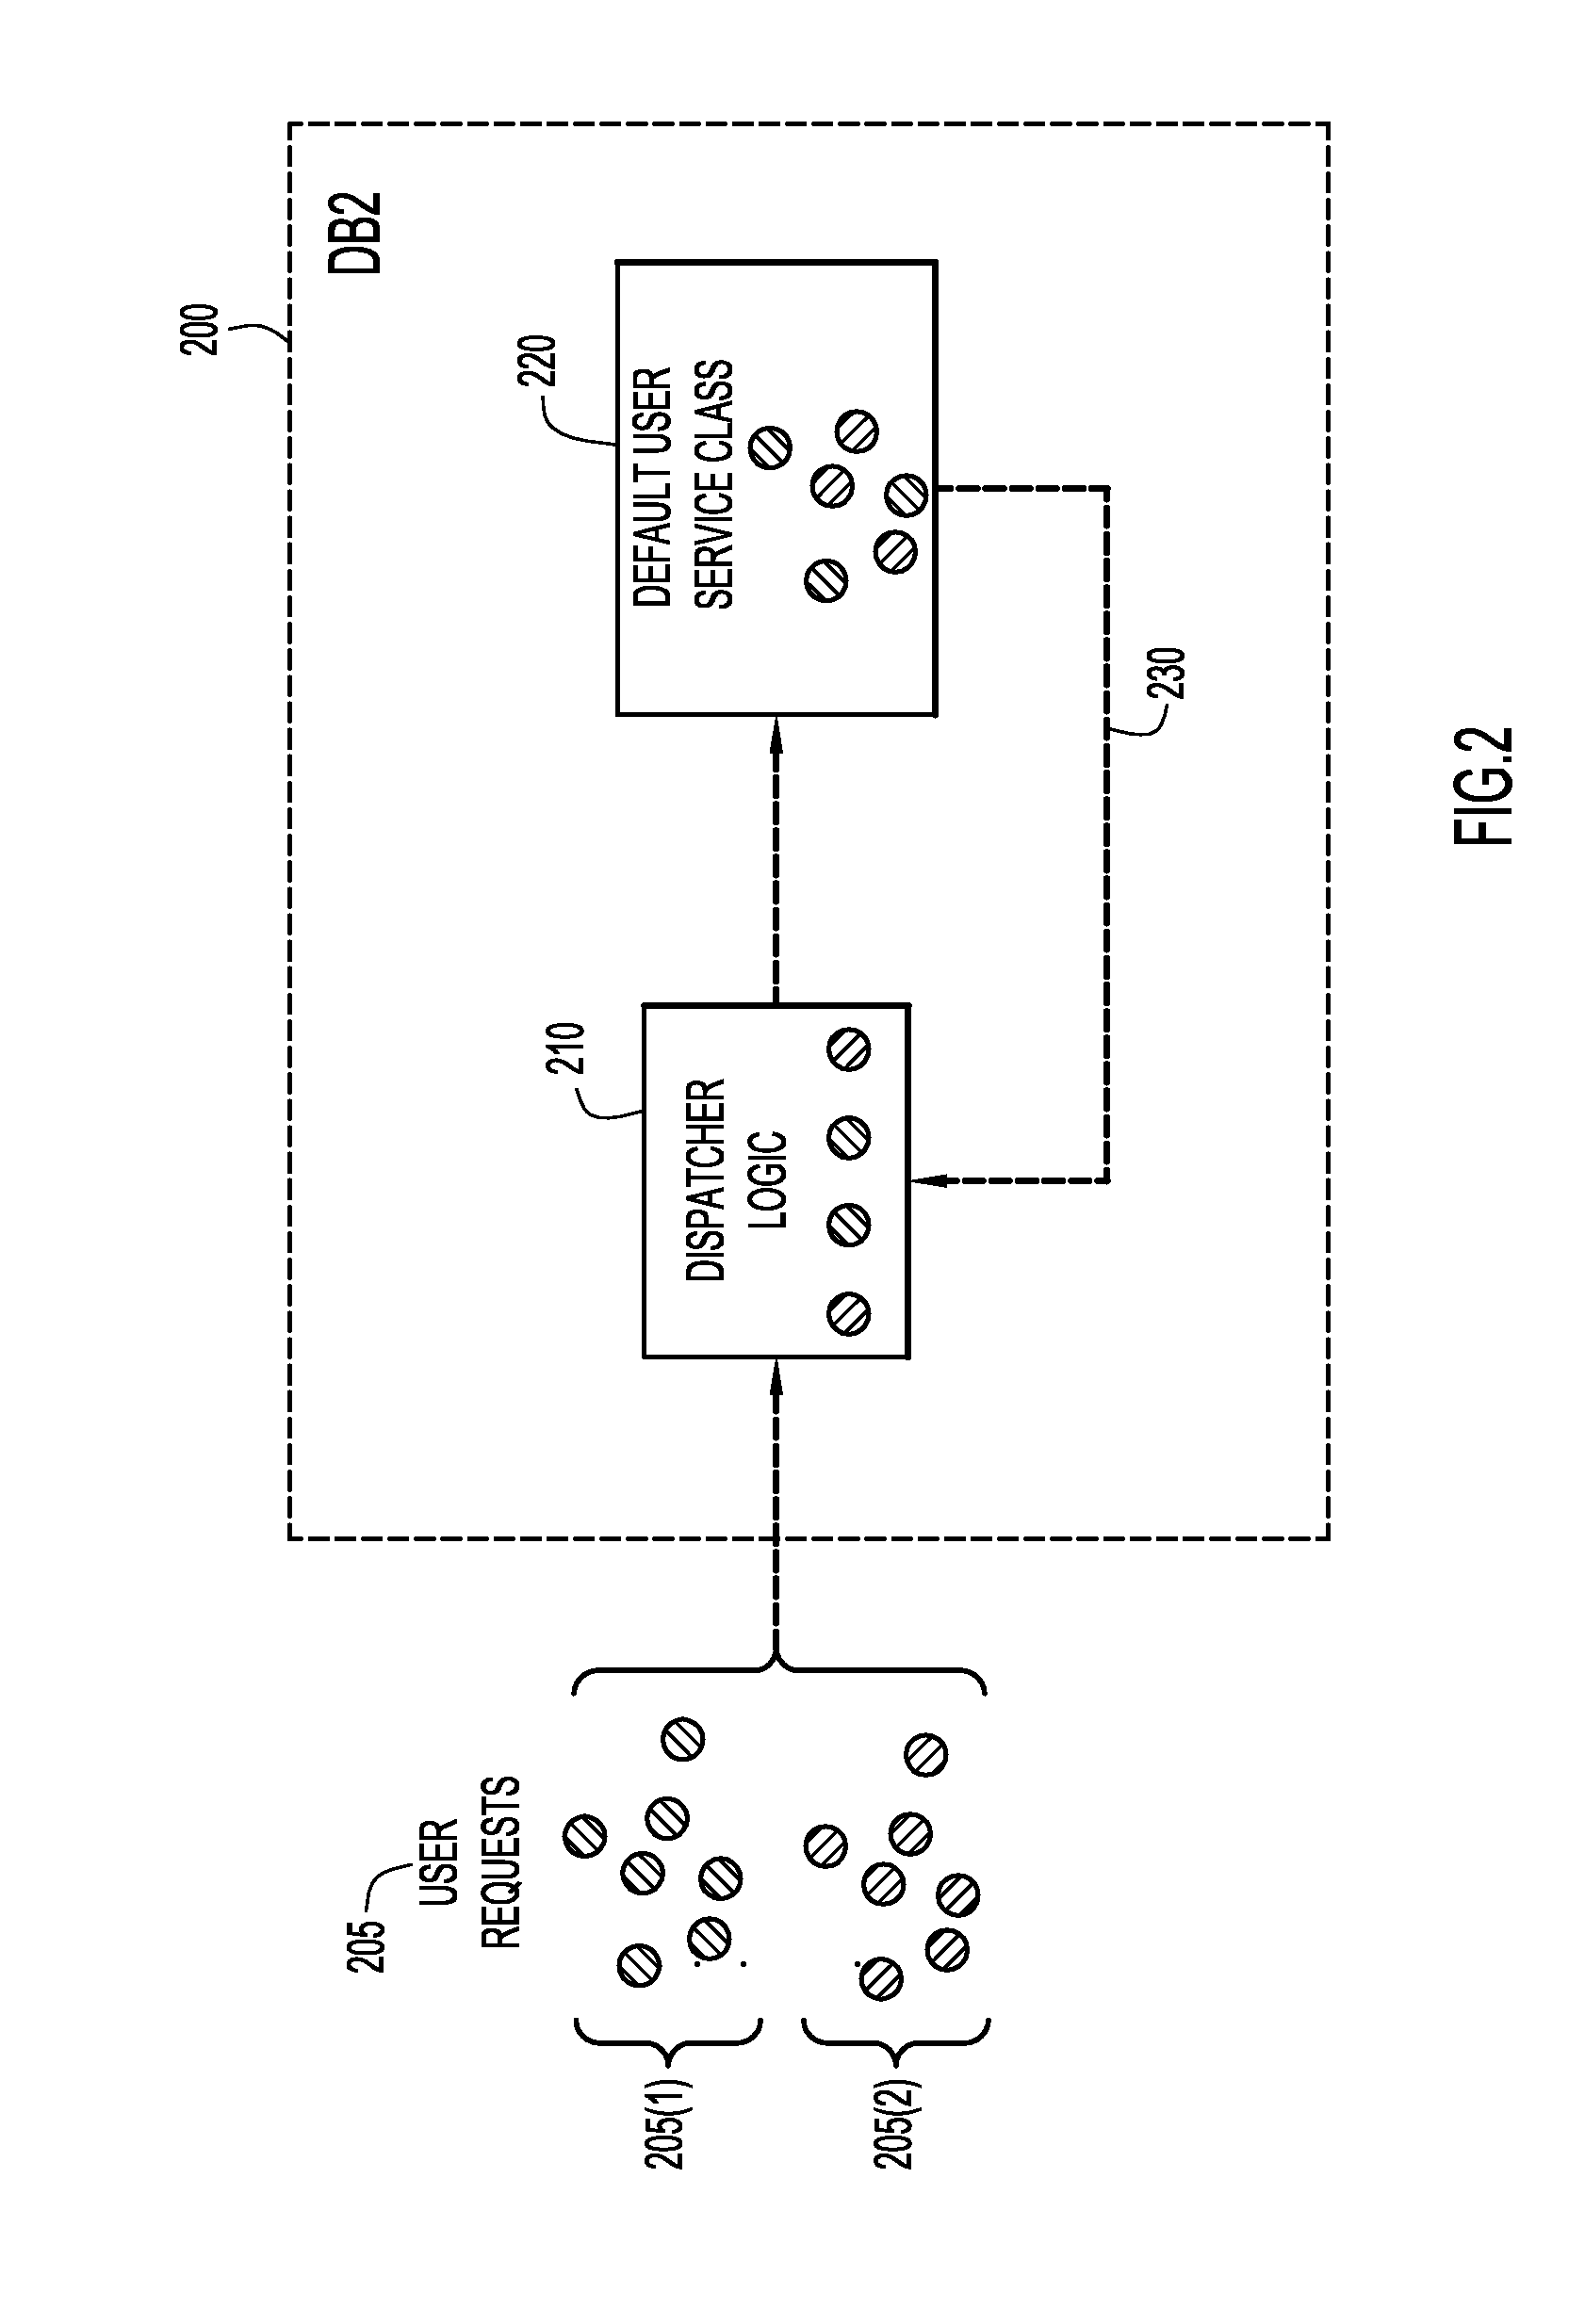 Processor provisioning by a middleware system for a plurality of logical processor partitions